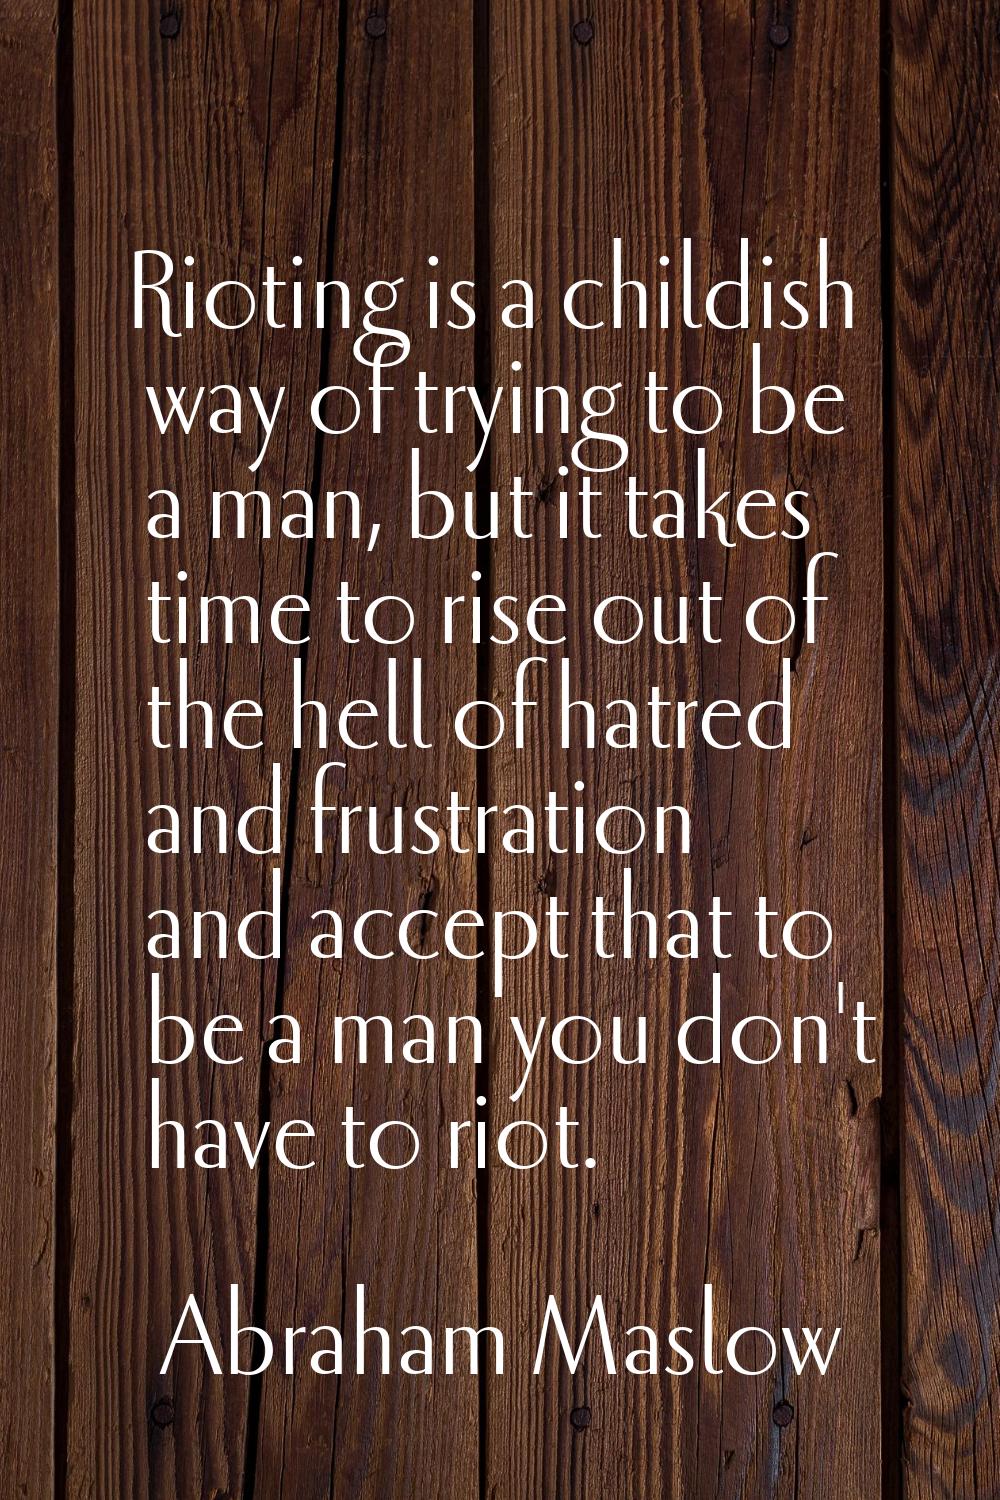 Rioting is a childish way of trying to be a man, but it takes time to rise out of the hell of hatre